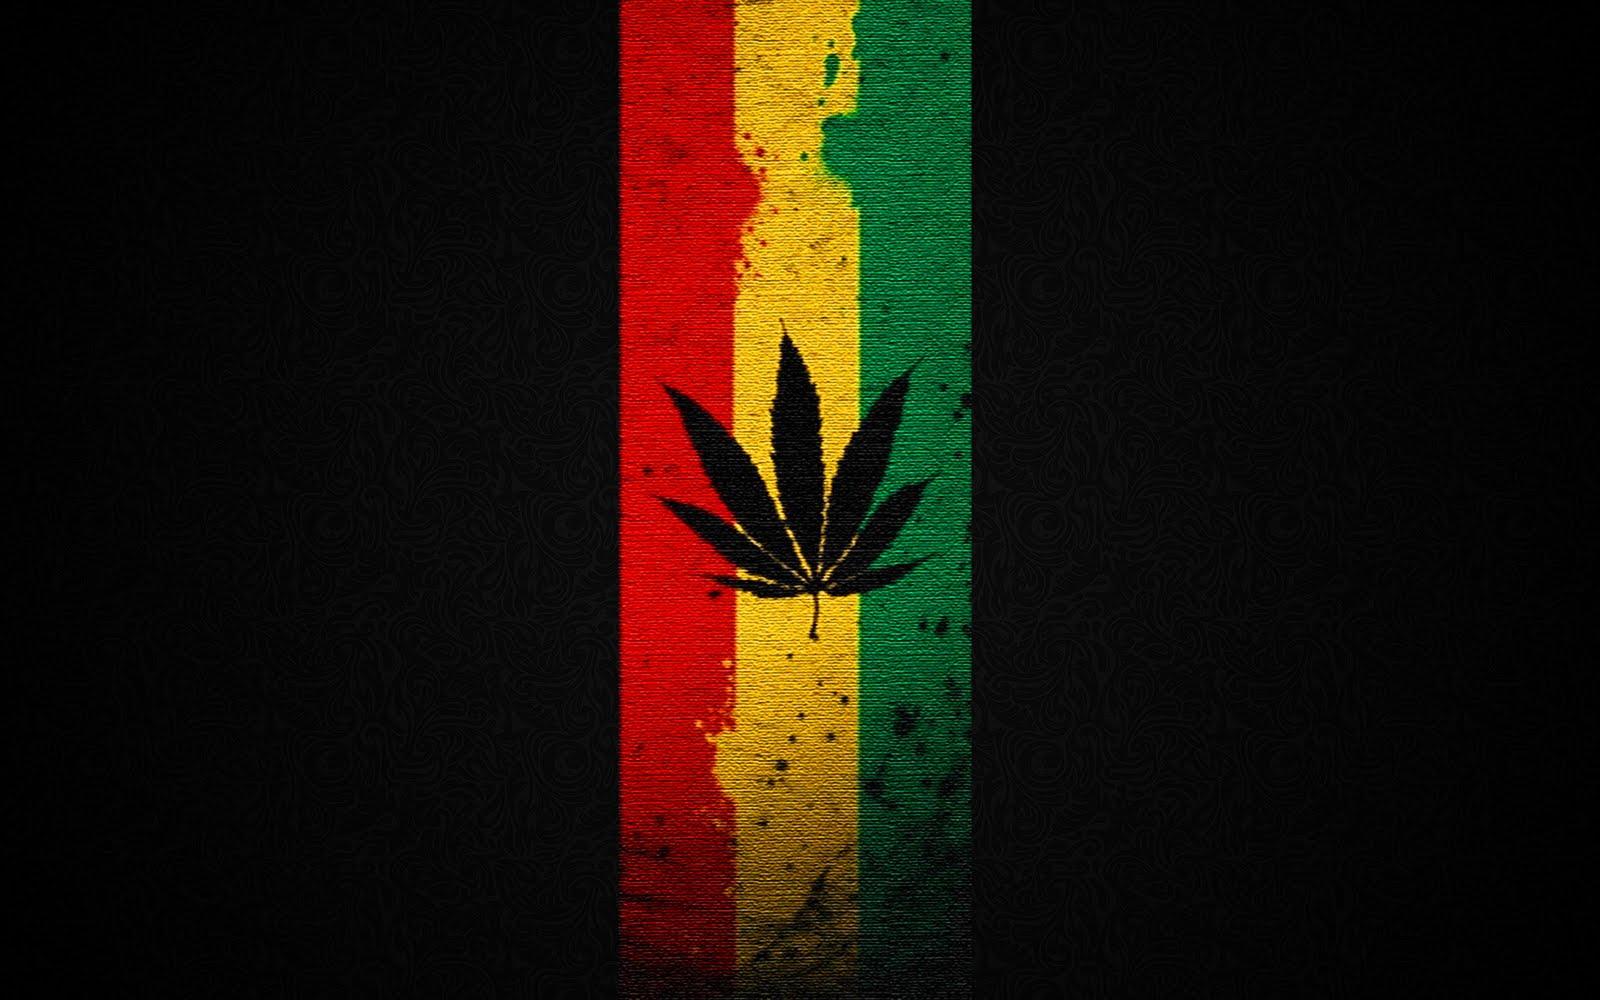 EBW Jamaica Flag Wallpapers in Best Resolutions, 2K Quality